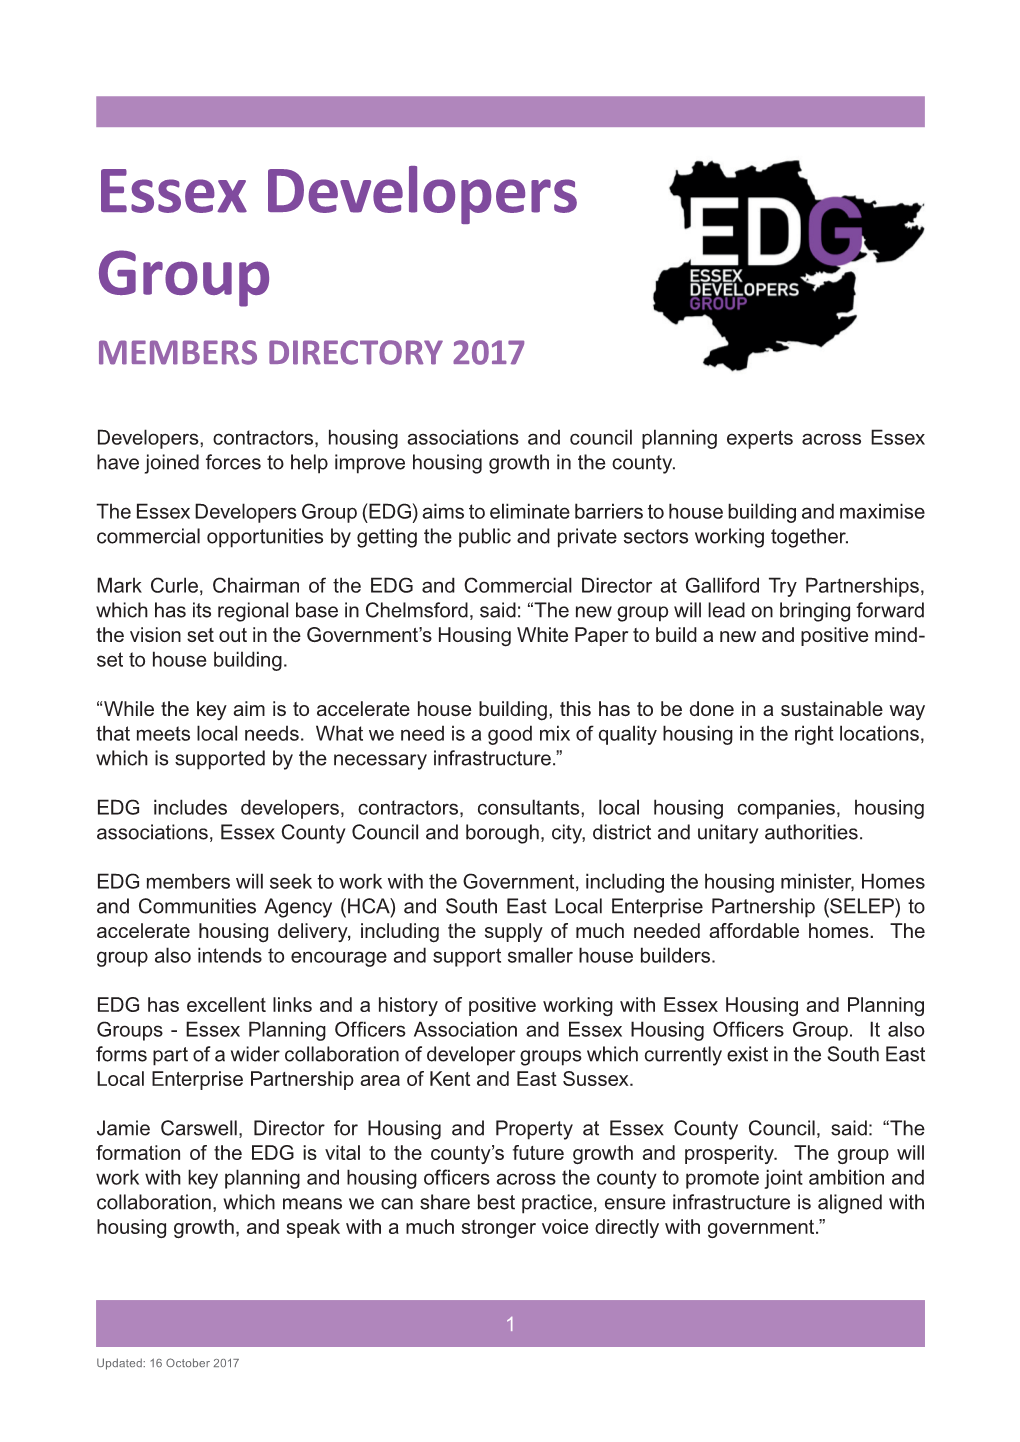 Essex Developers Group MEMBERS DIRECTORY 2017